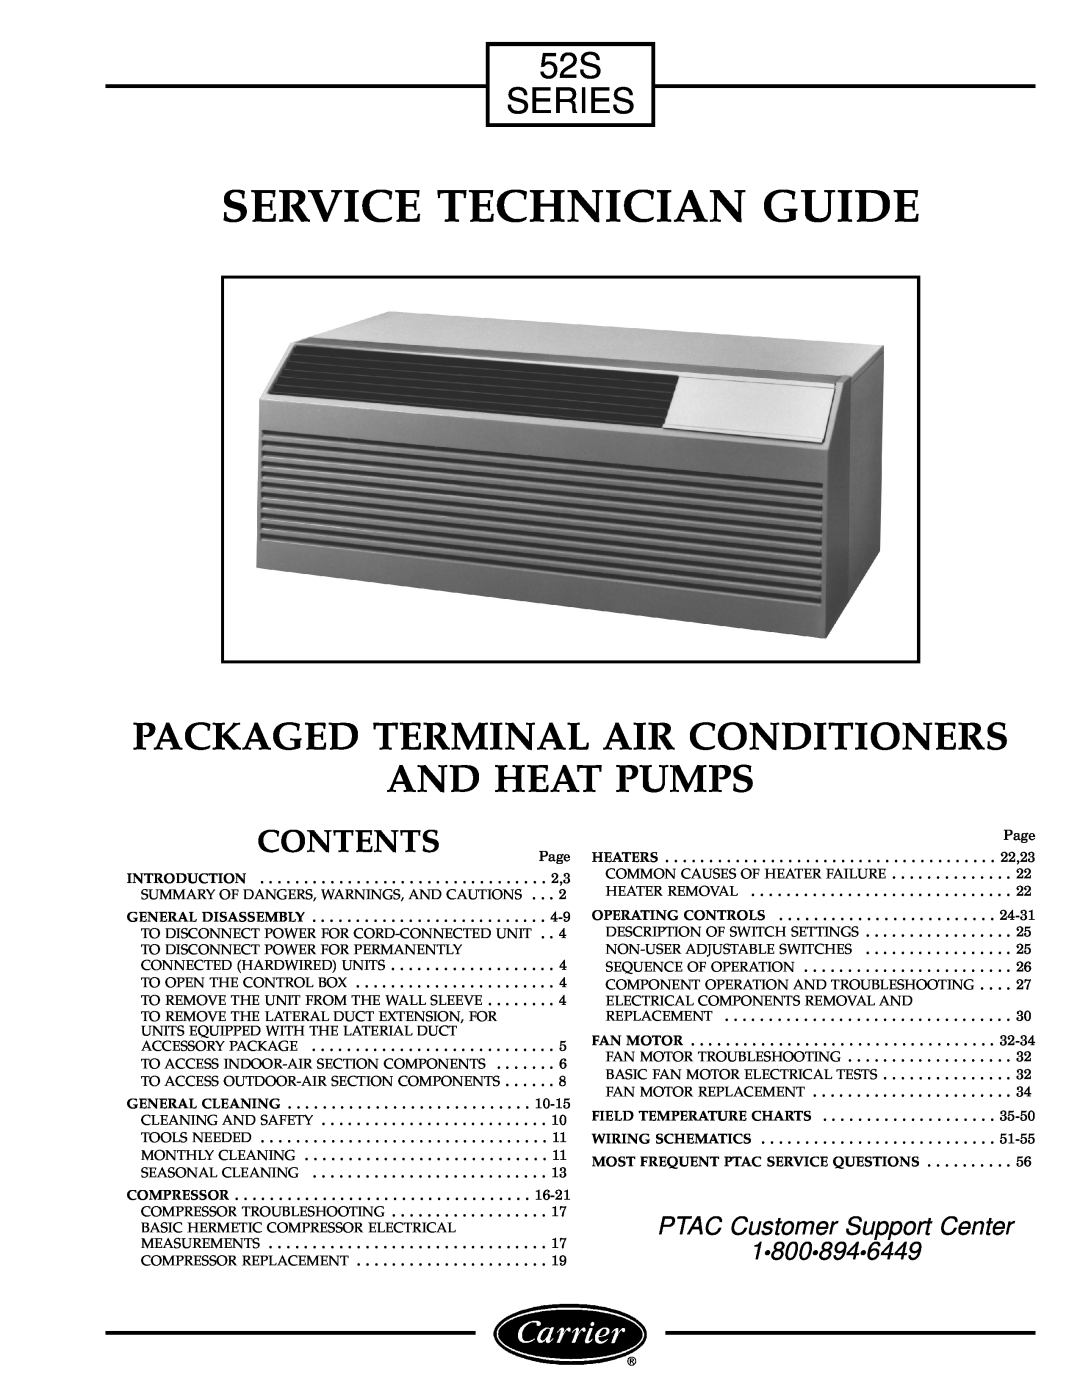 Carrier manual 52S SERIES, Contents, Service Technician Guide, Packaged Terminal Air Conditioners And Heat Pumps 